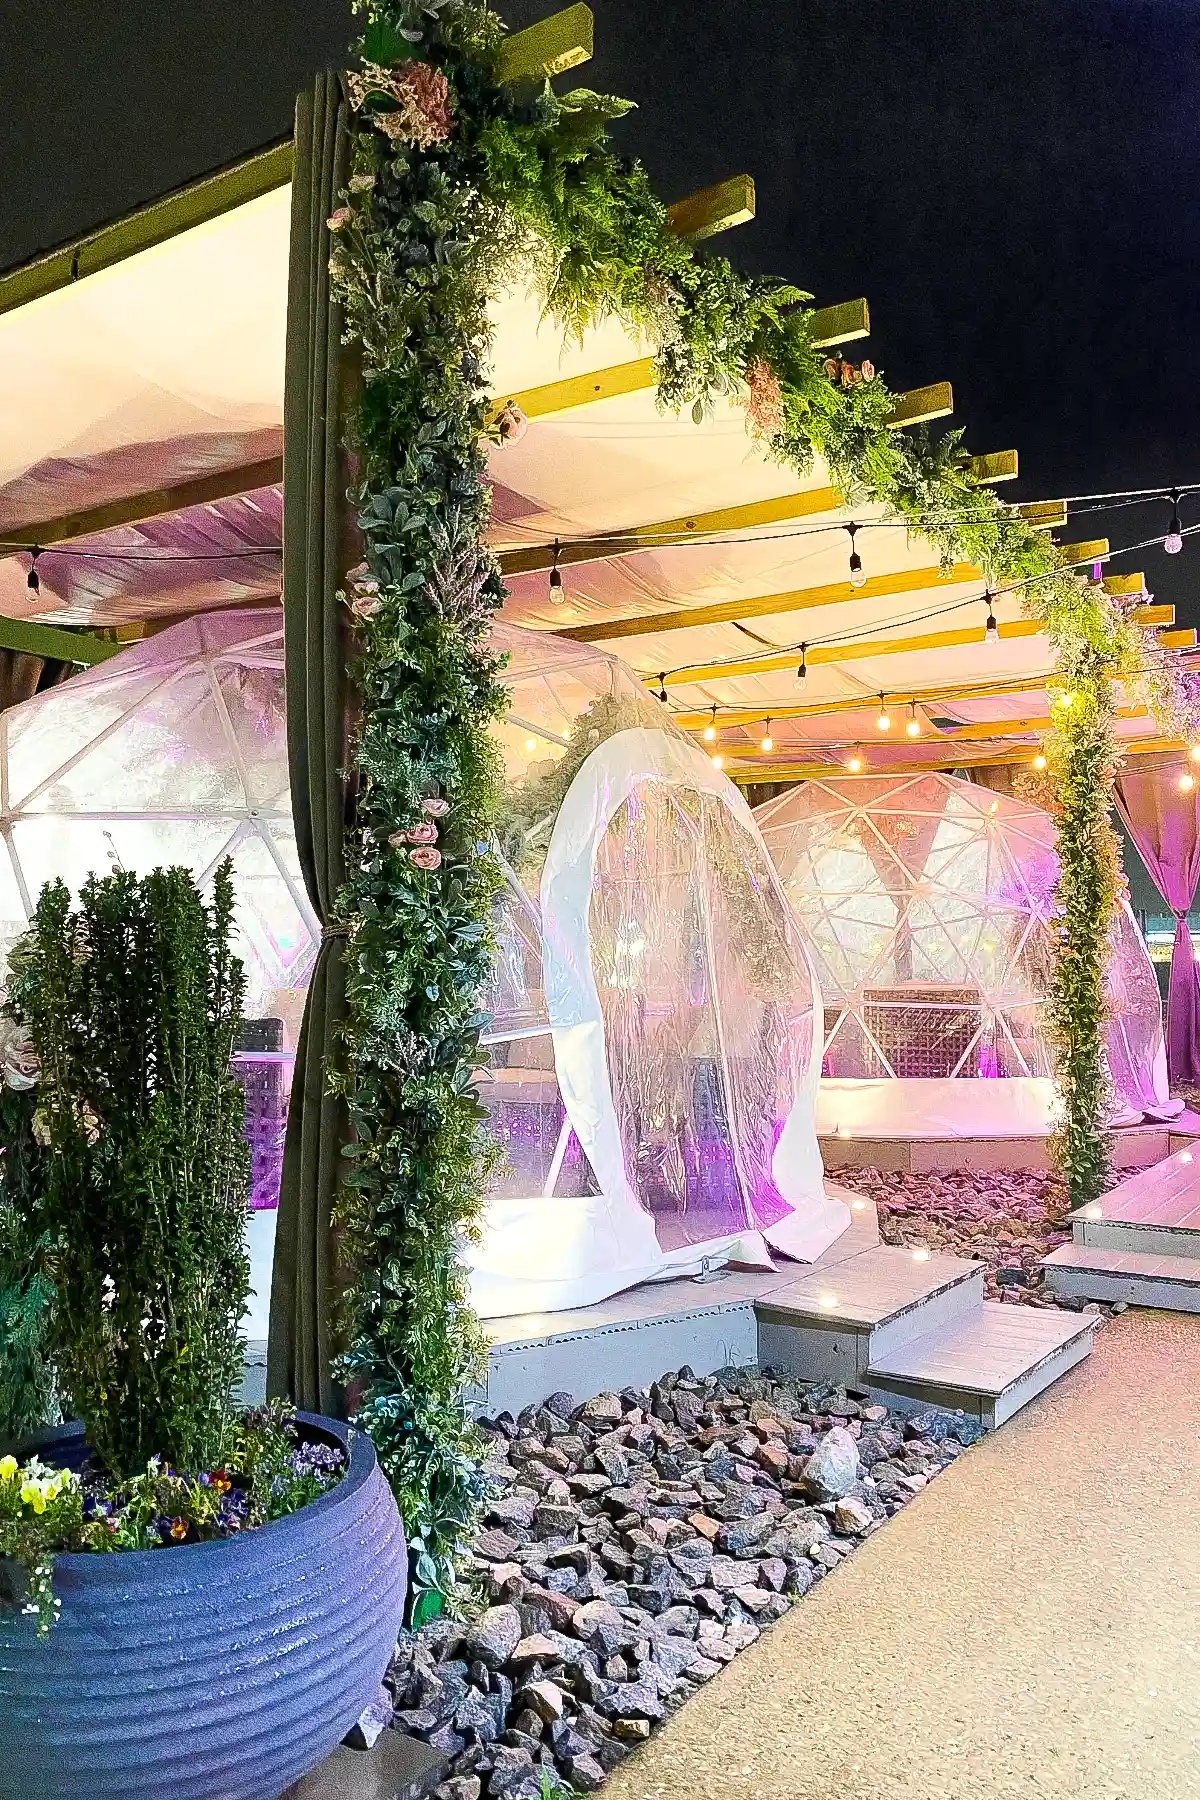 Two igloo lounges outside at night with pink lights.